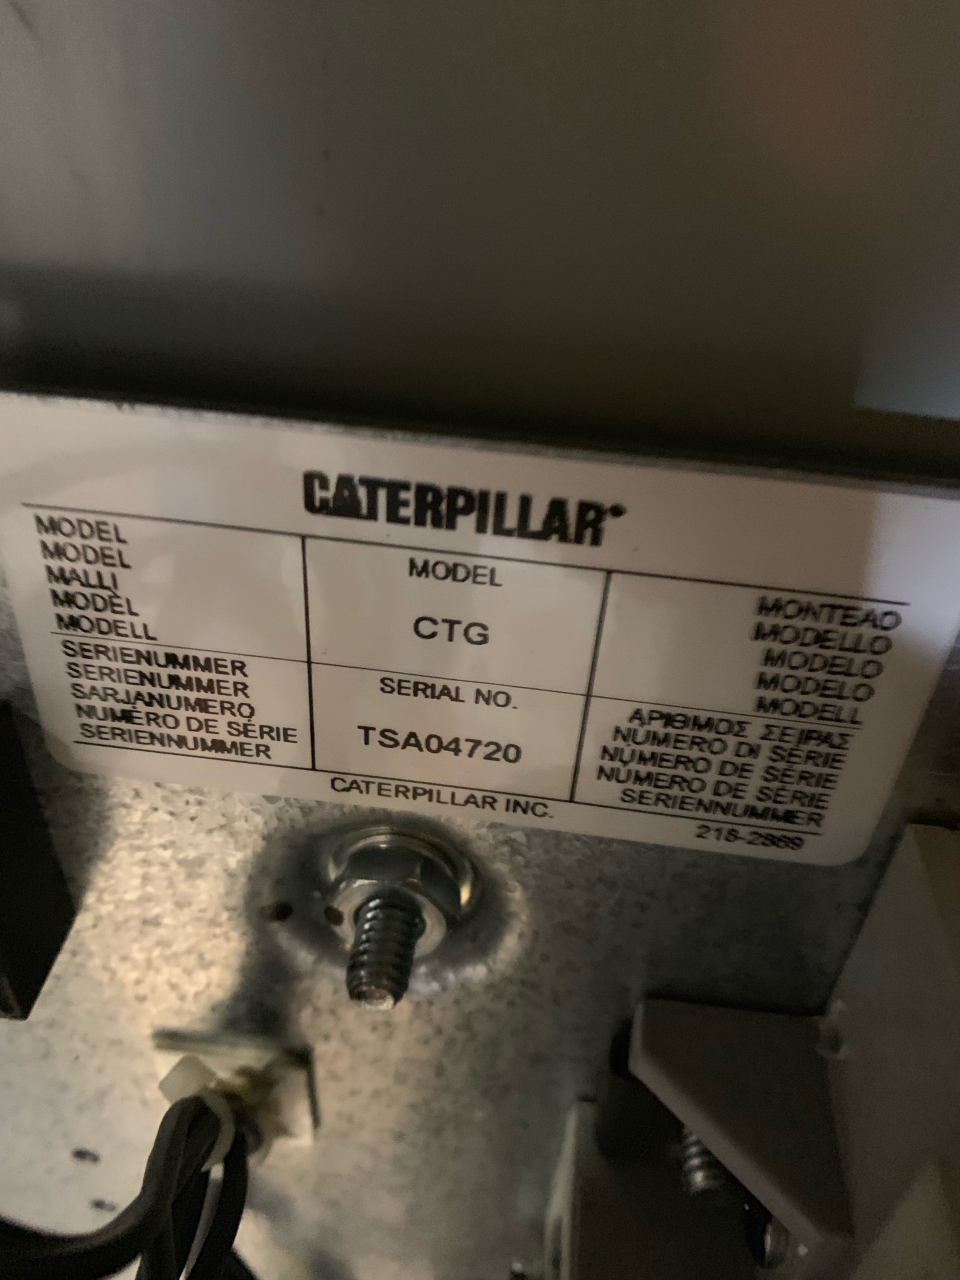 Low Hour Caterpillar CTG 225 Amp  Transfer Switch Item-16577 4